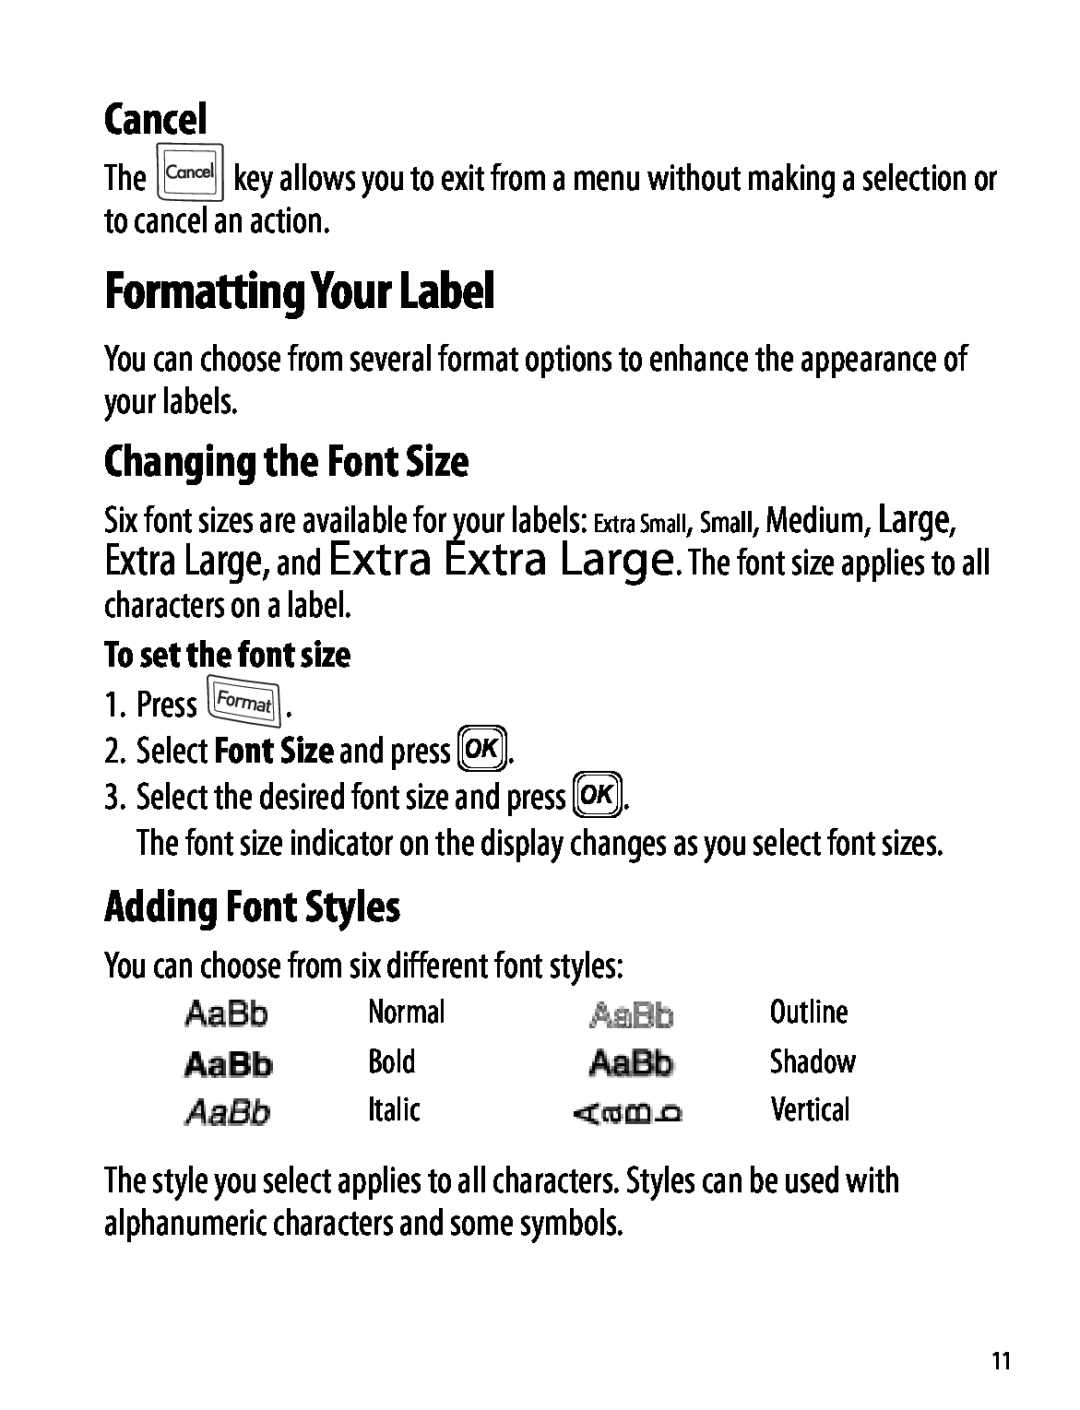 Dymo 220P manual Formatting Your Label, Cancel, Changing the Font Size, Adding Font Styles, To set the font size 